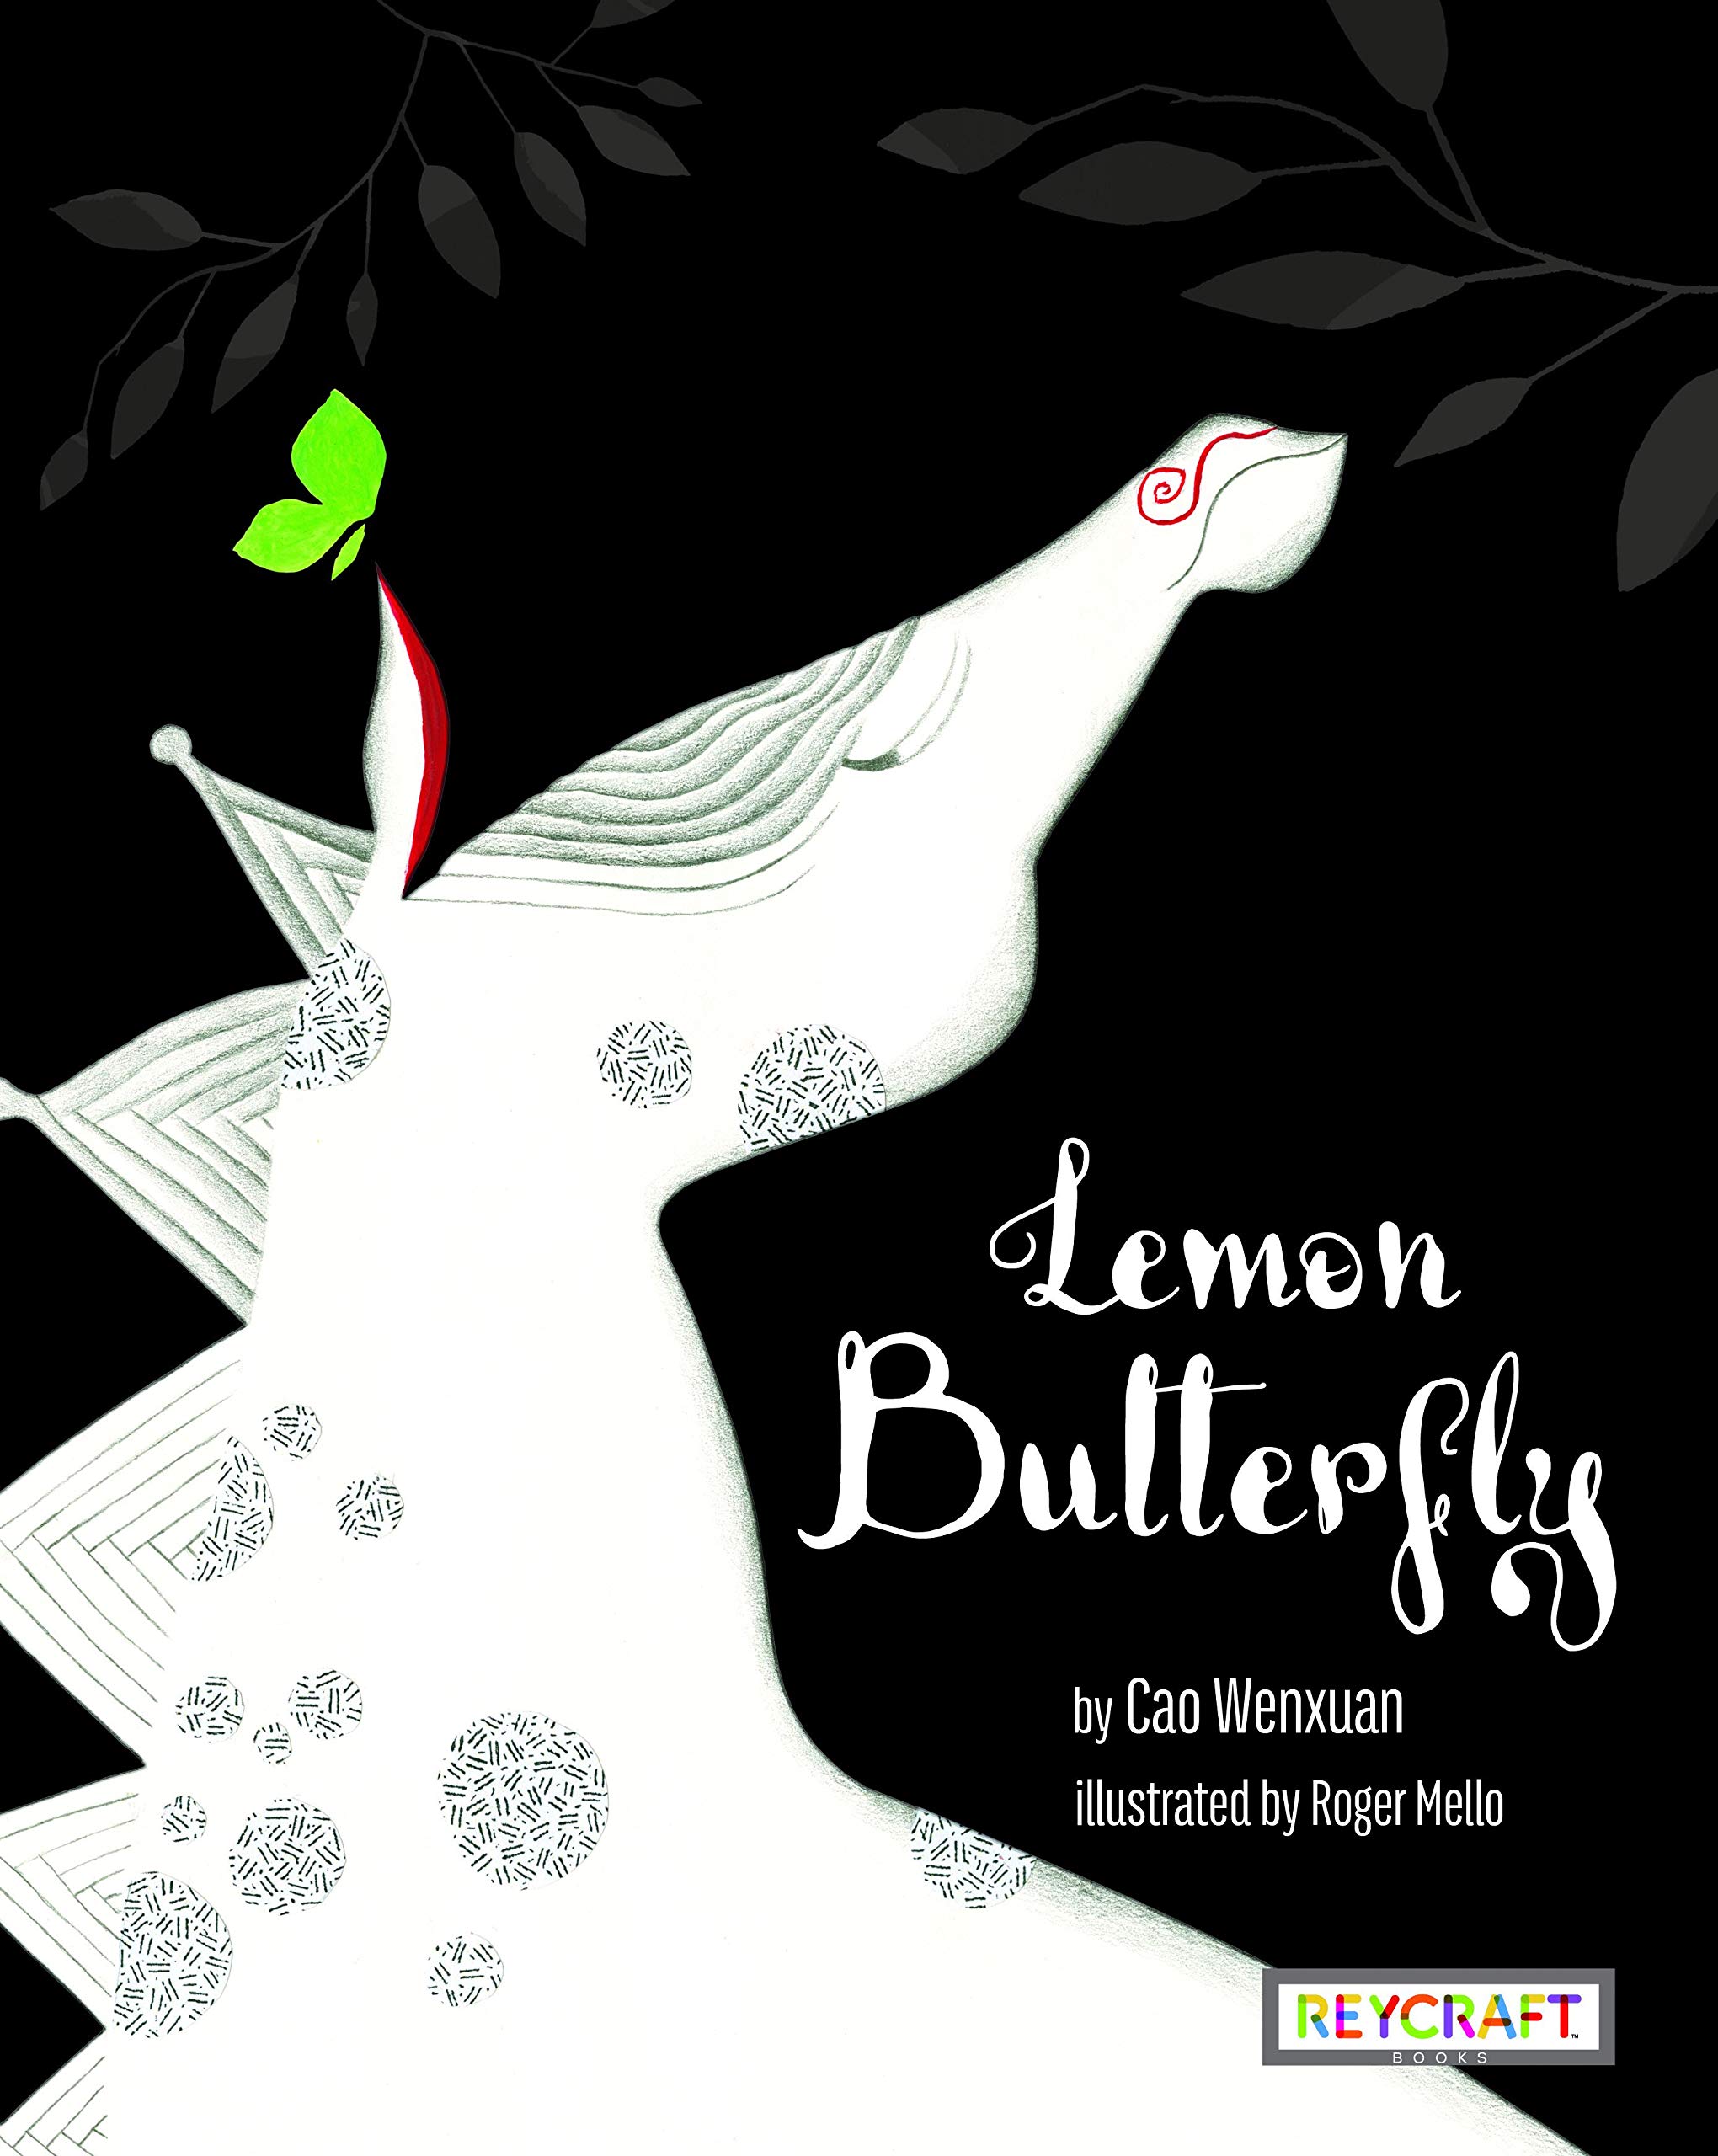 Cover of Lemon Butterfly featuring an illustration of a white horse on a black background.